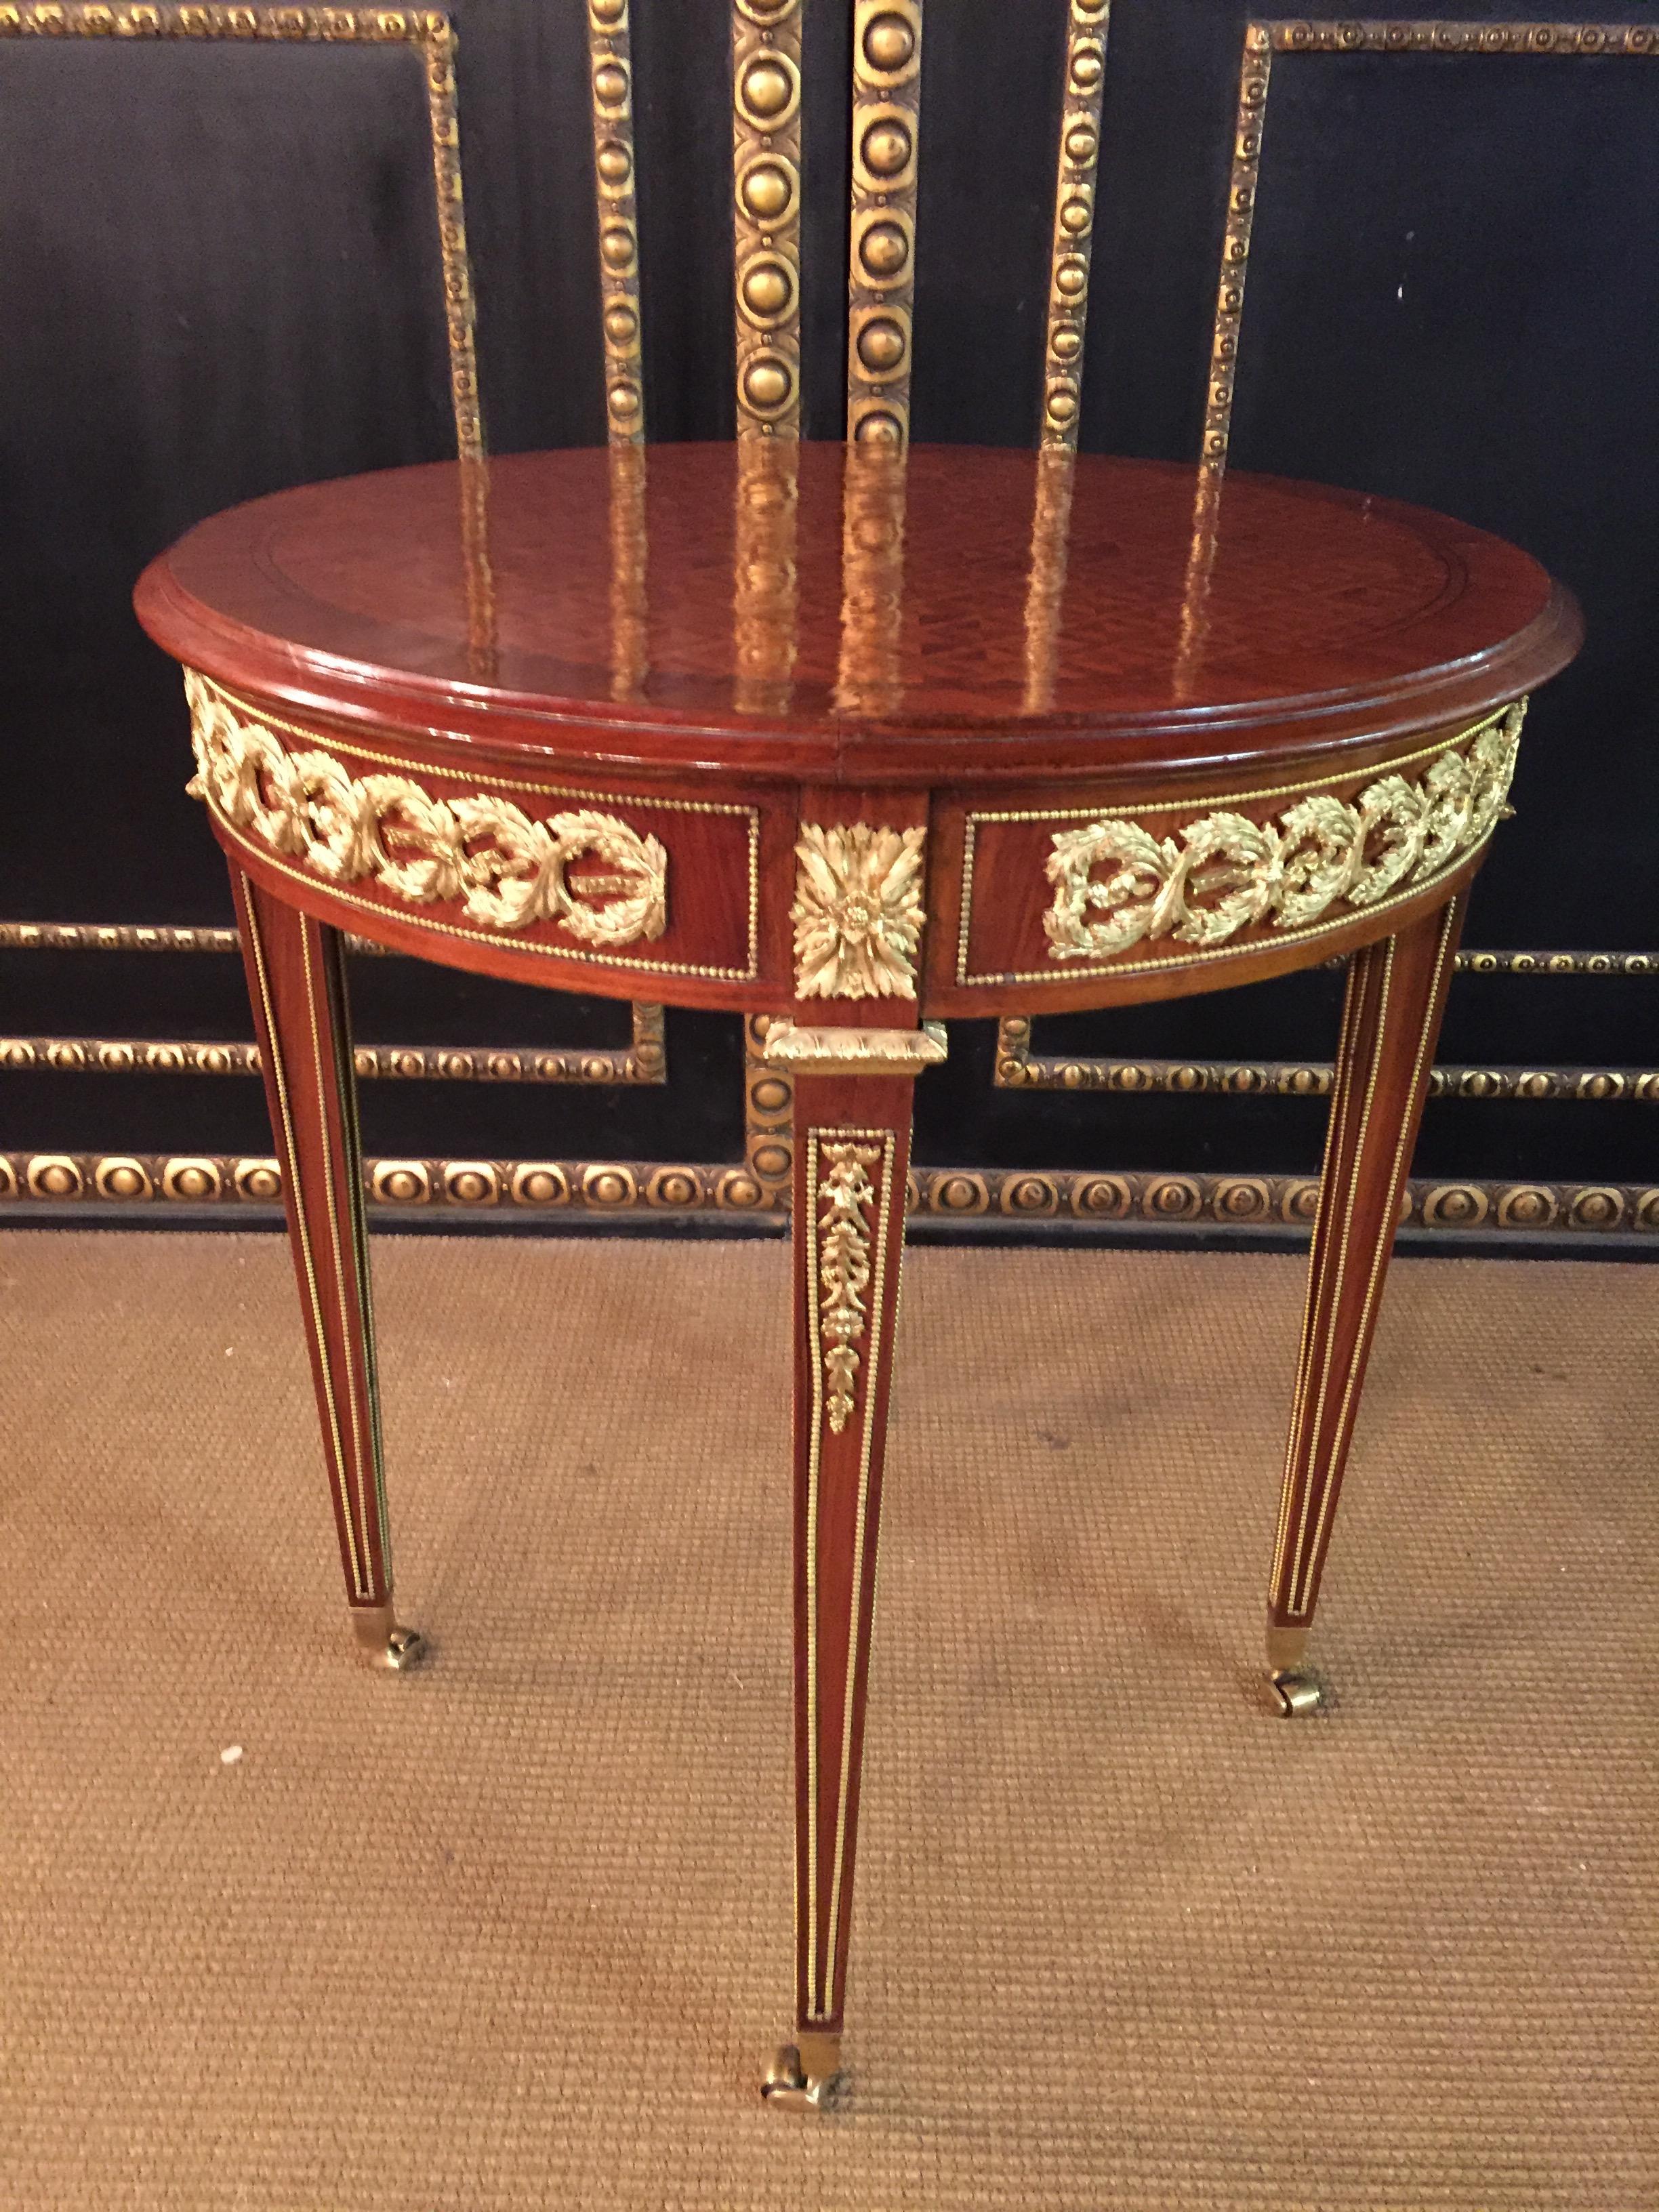 20th Century Louis XVI Style with Round Platte with Inlays French Table 5